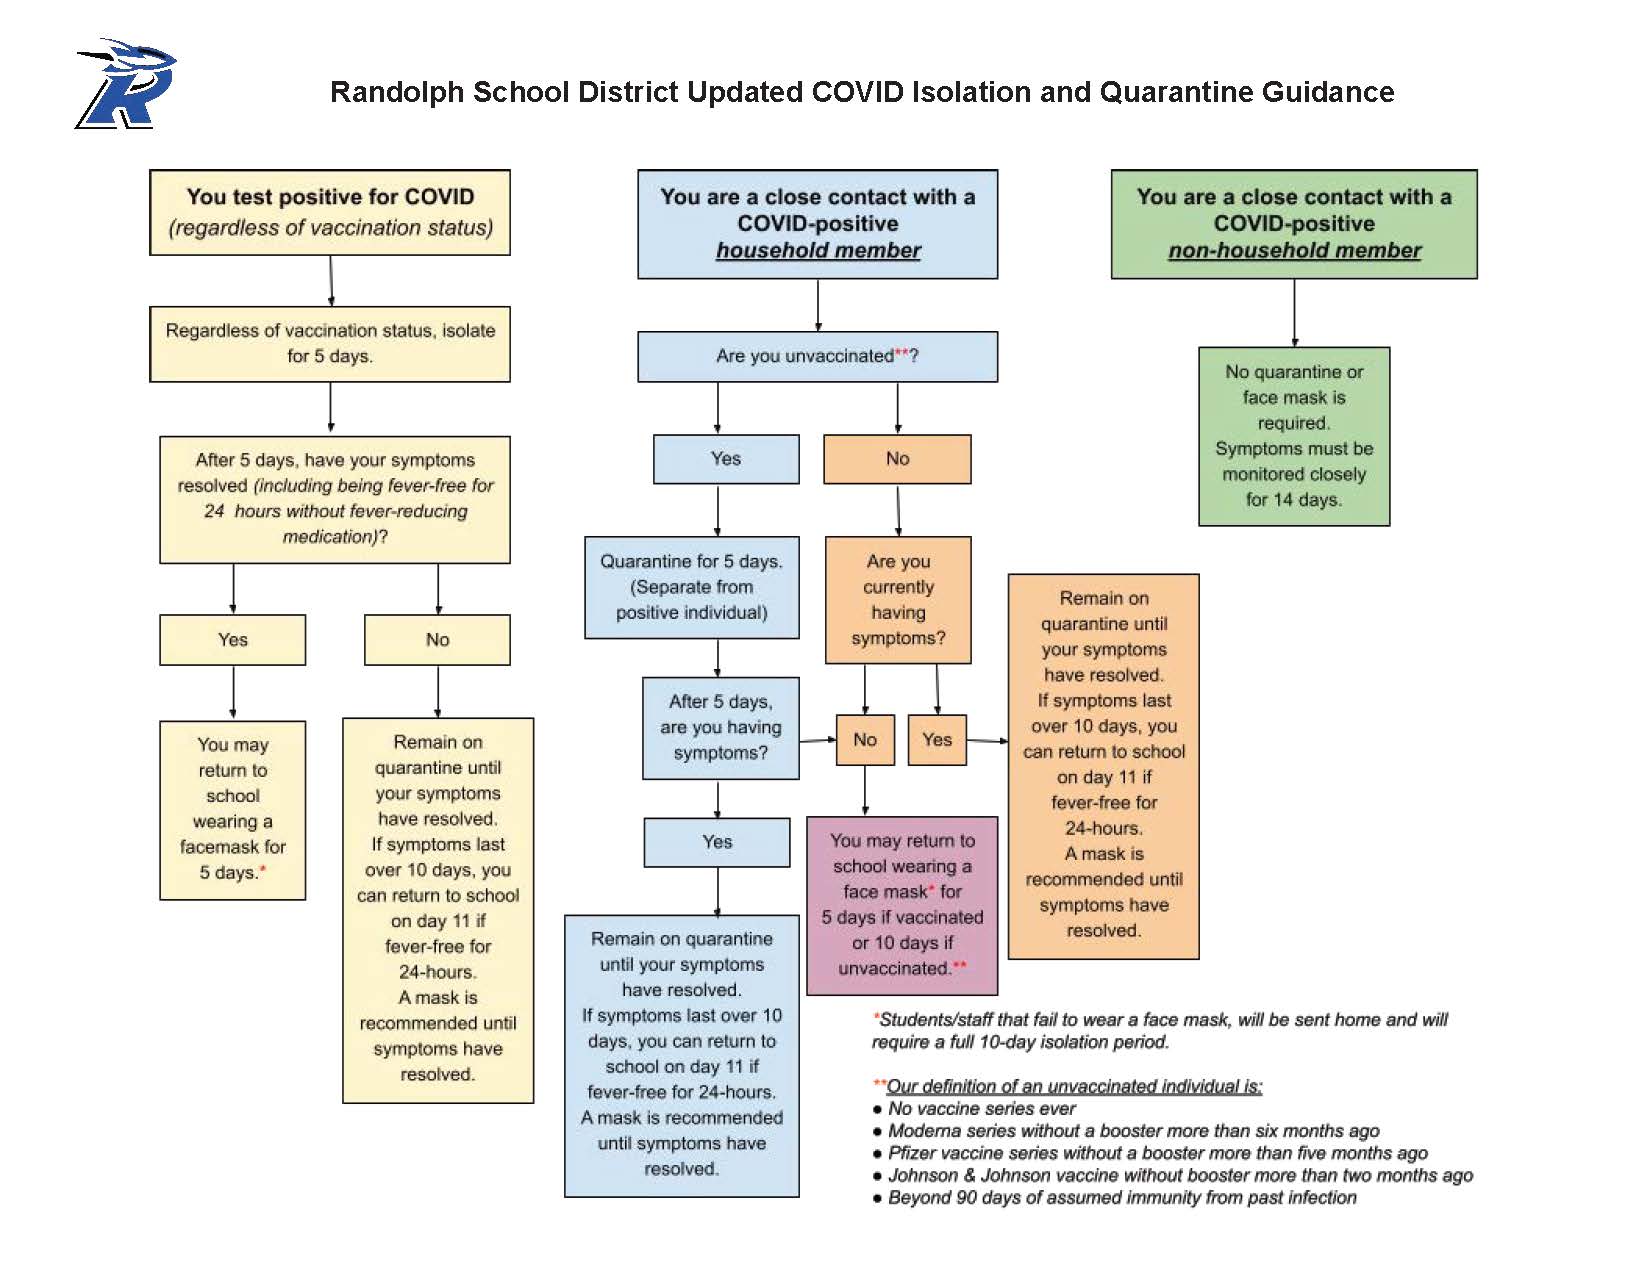 RSD Updated COVID Isolation and Quarantine Guidance